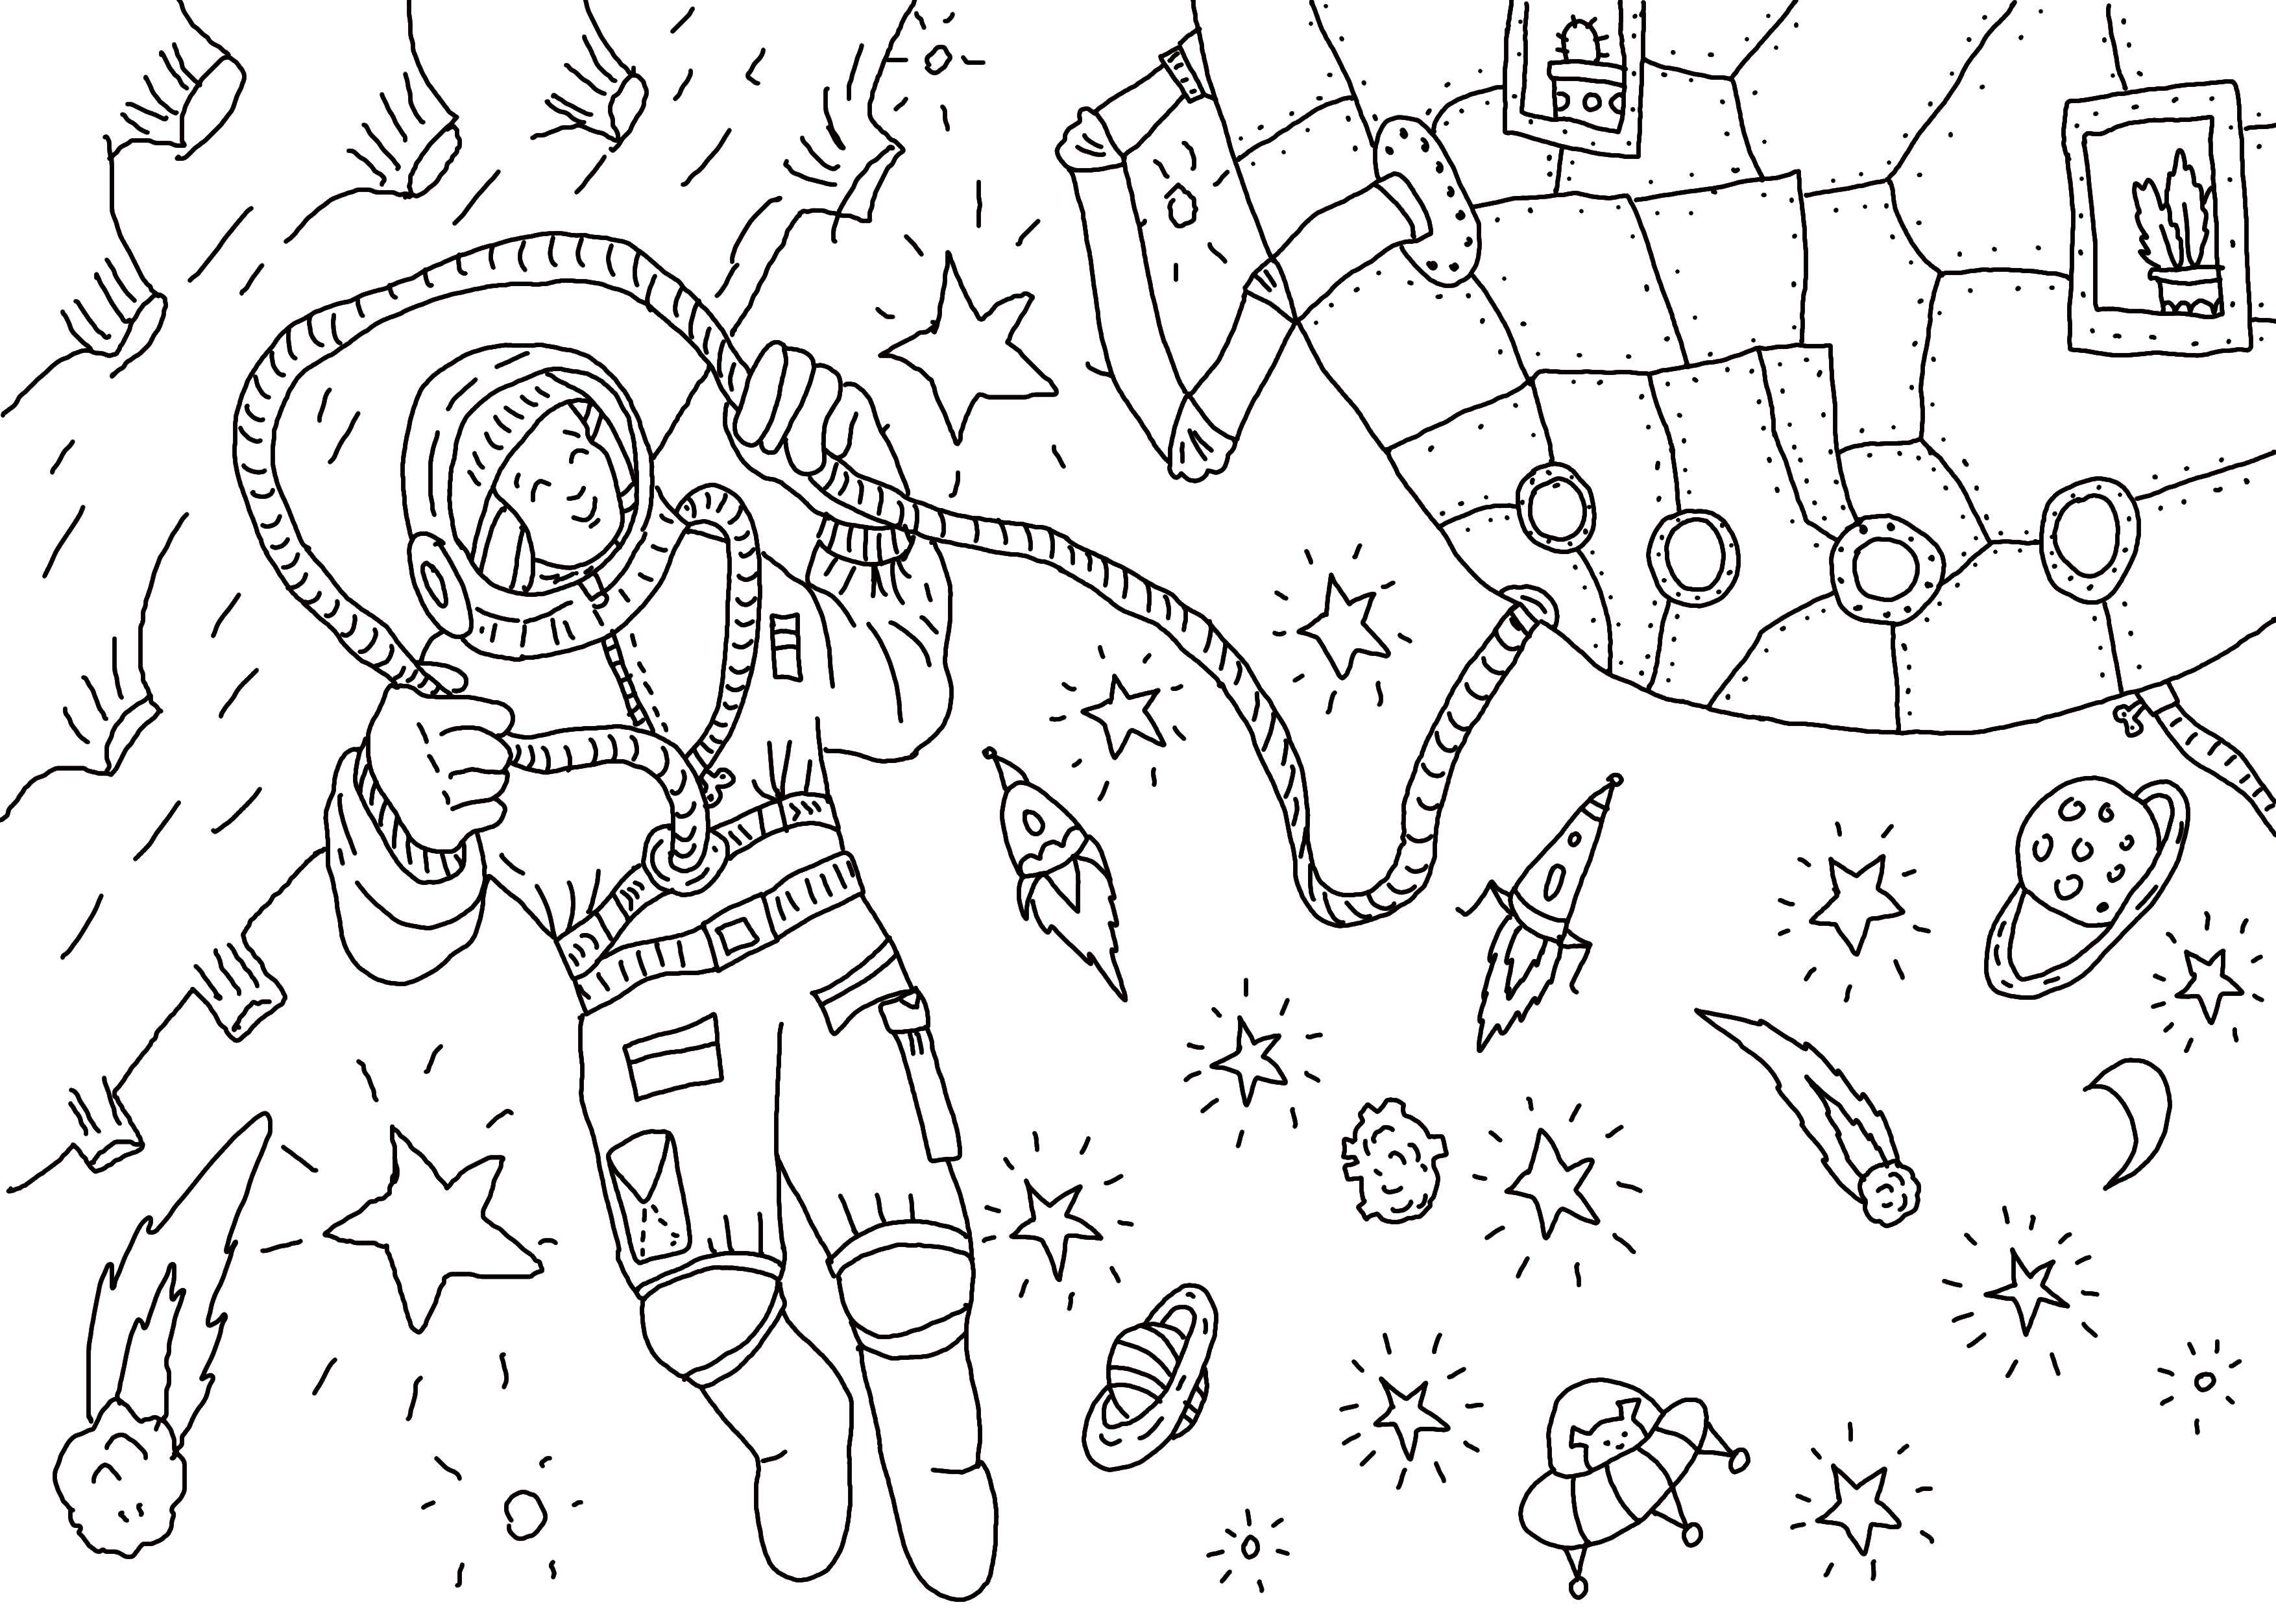 Coloring Man in space. Category space. Tags:  astronaut, rocket, star.